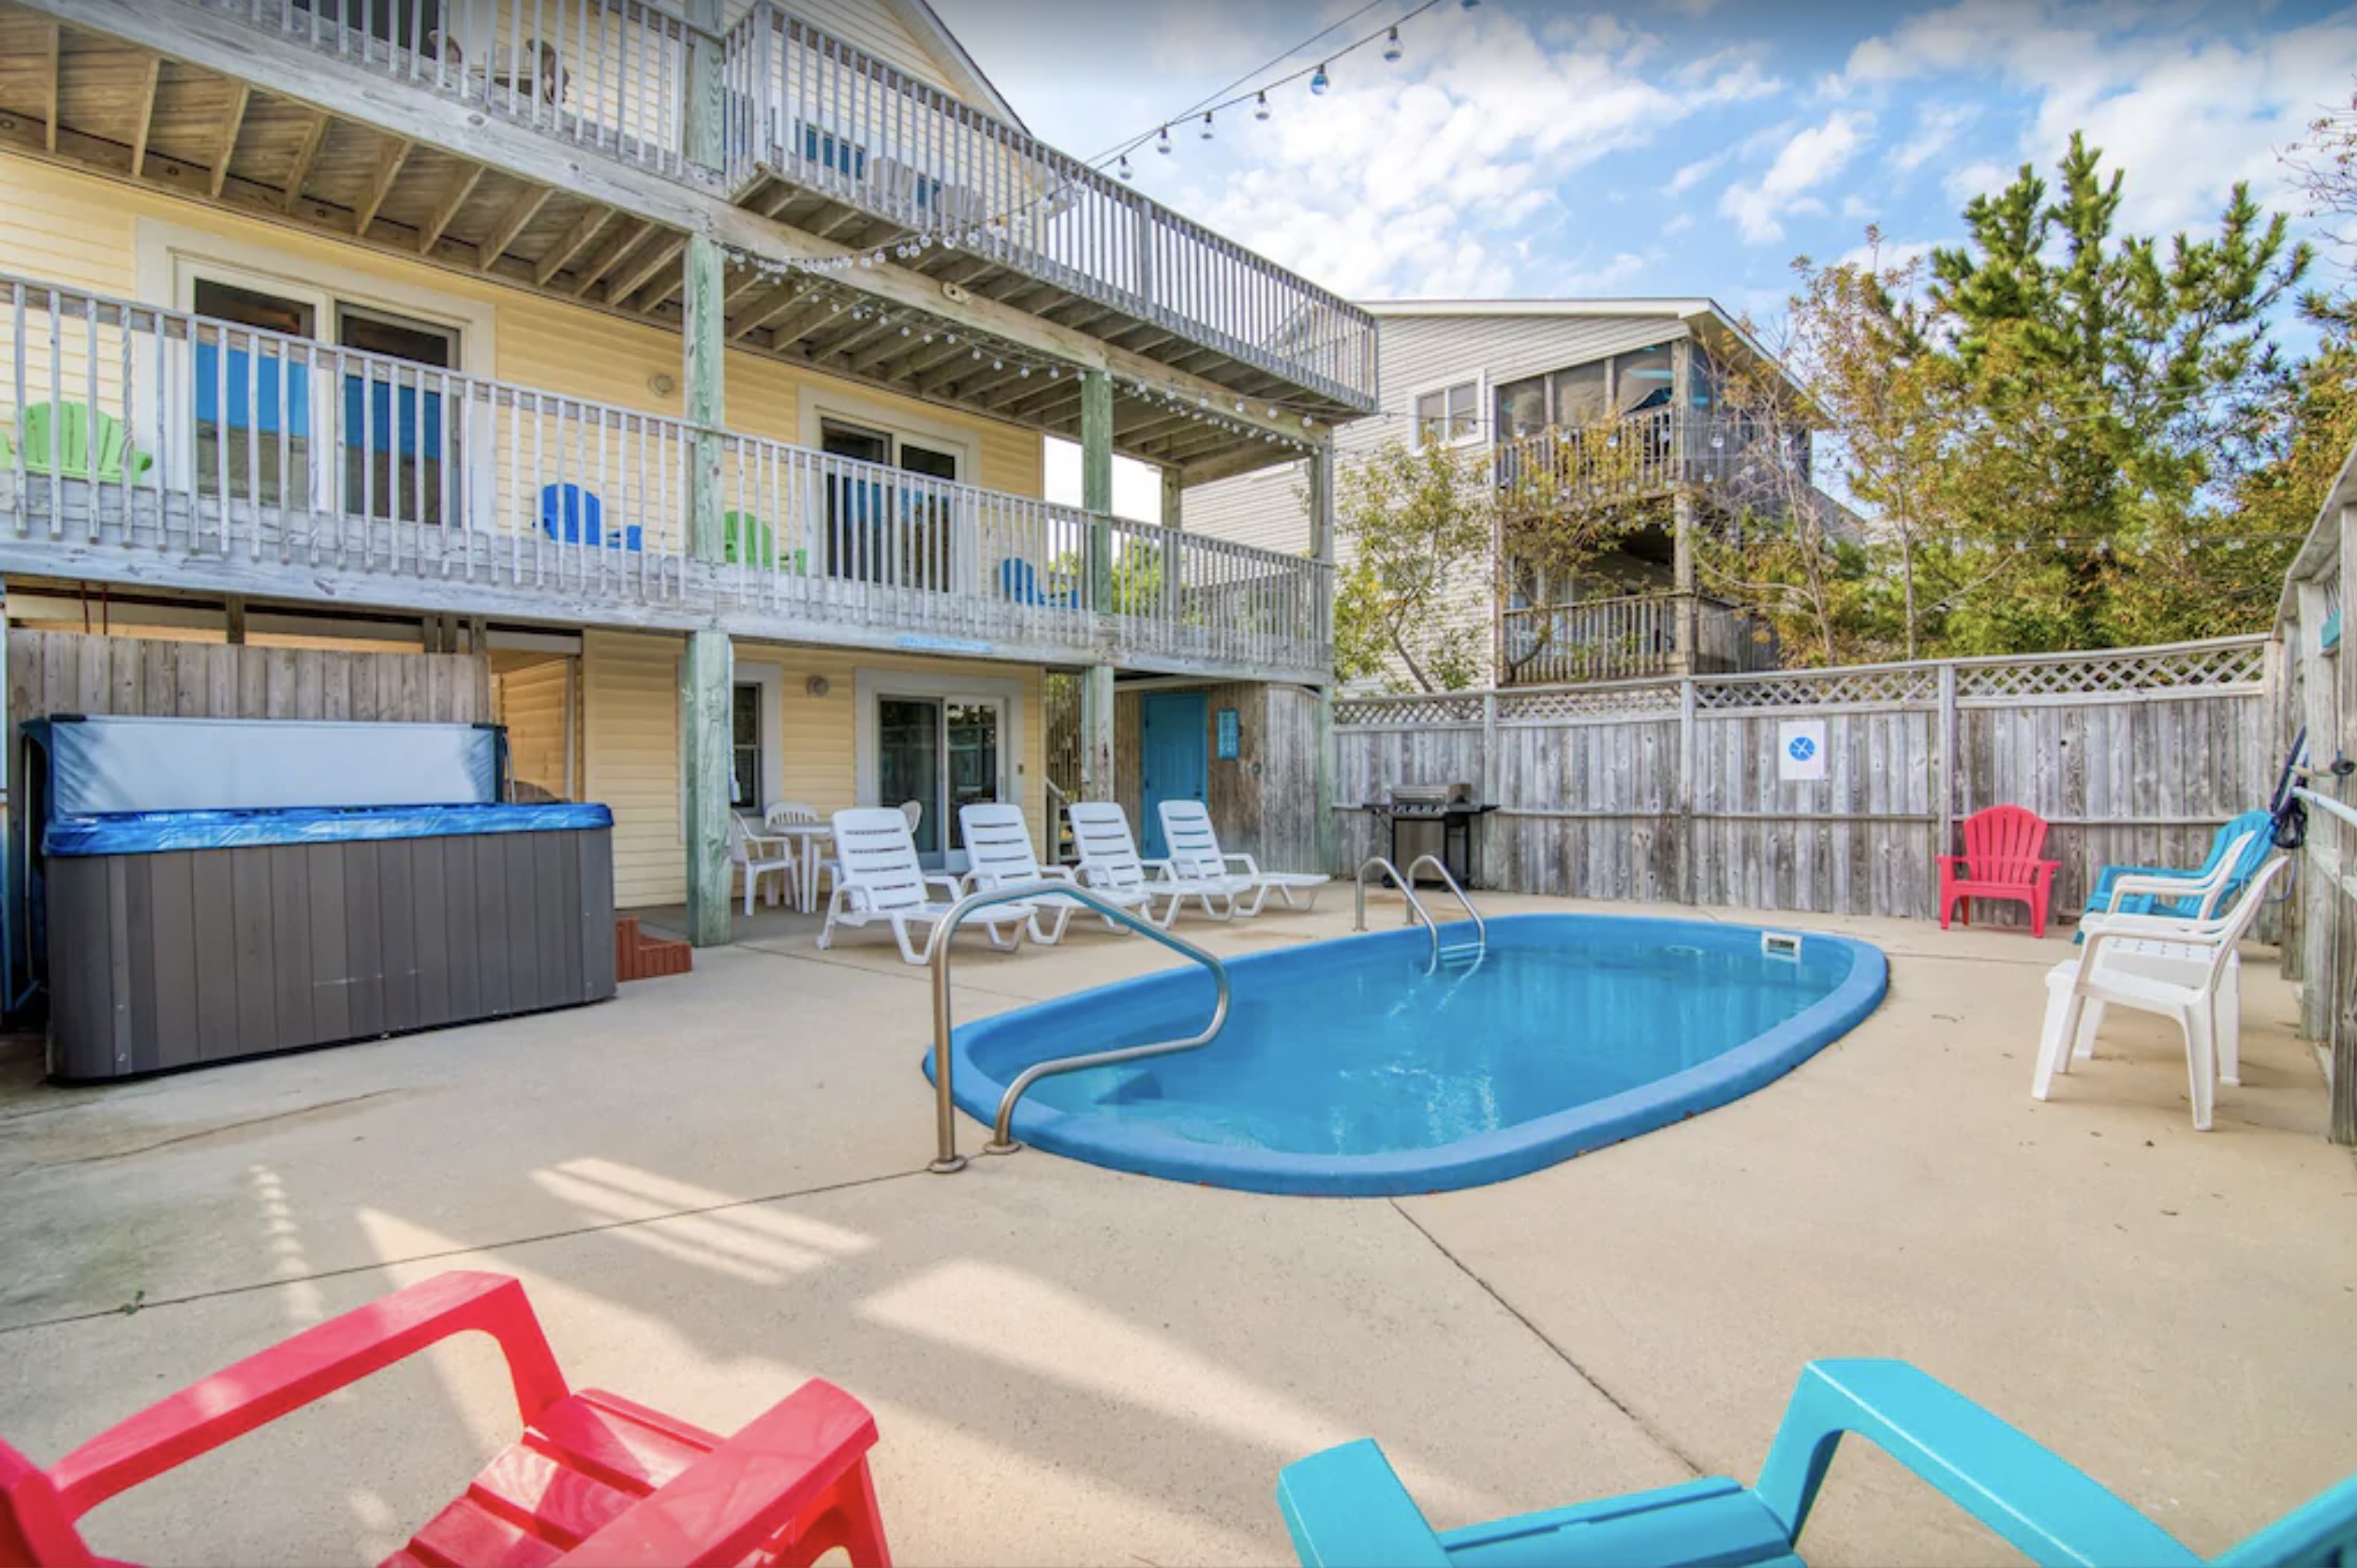 Outer Banks Vacation Rentals